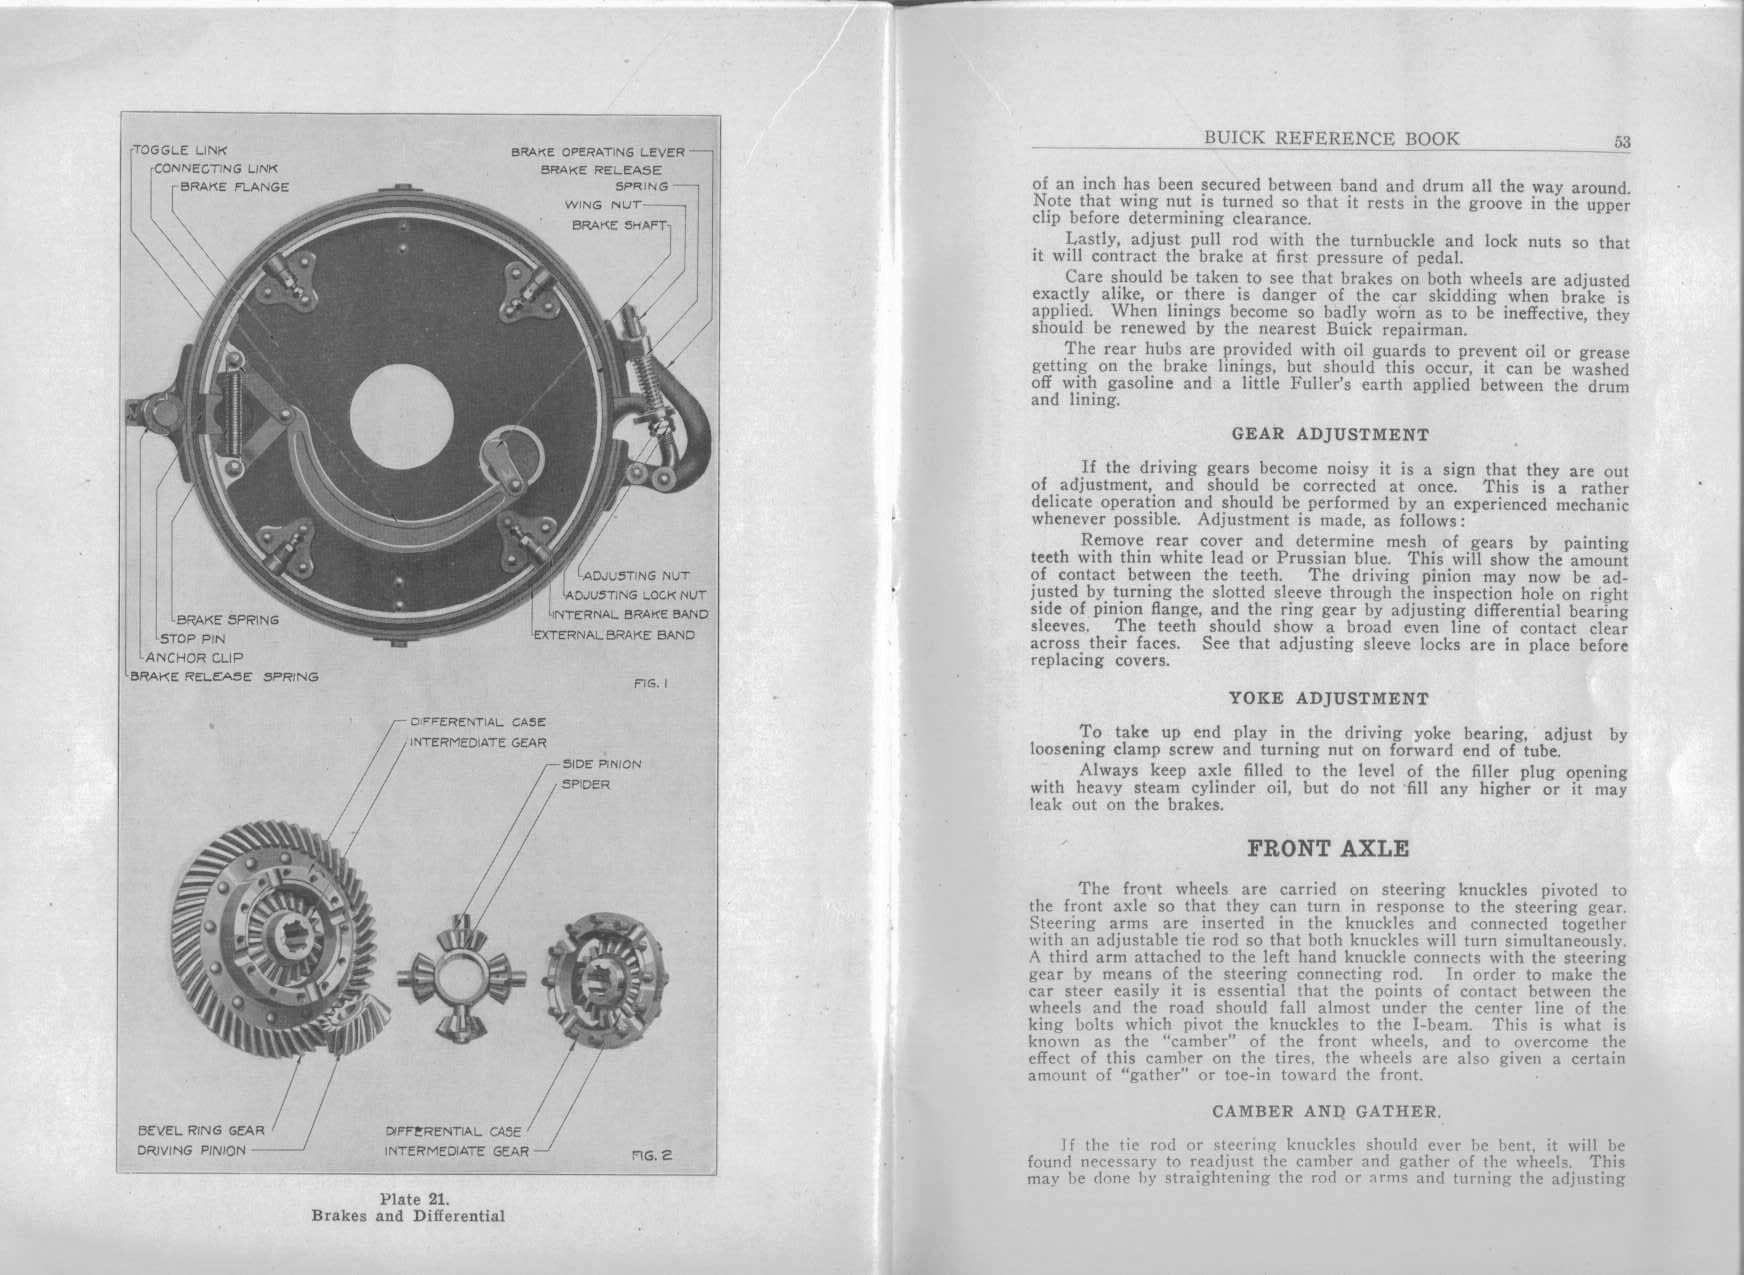 1916 Buick Reference Book-52-53